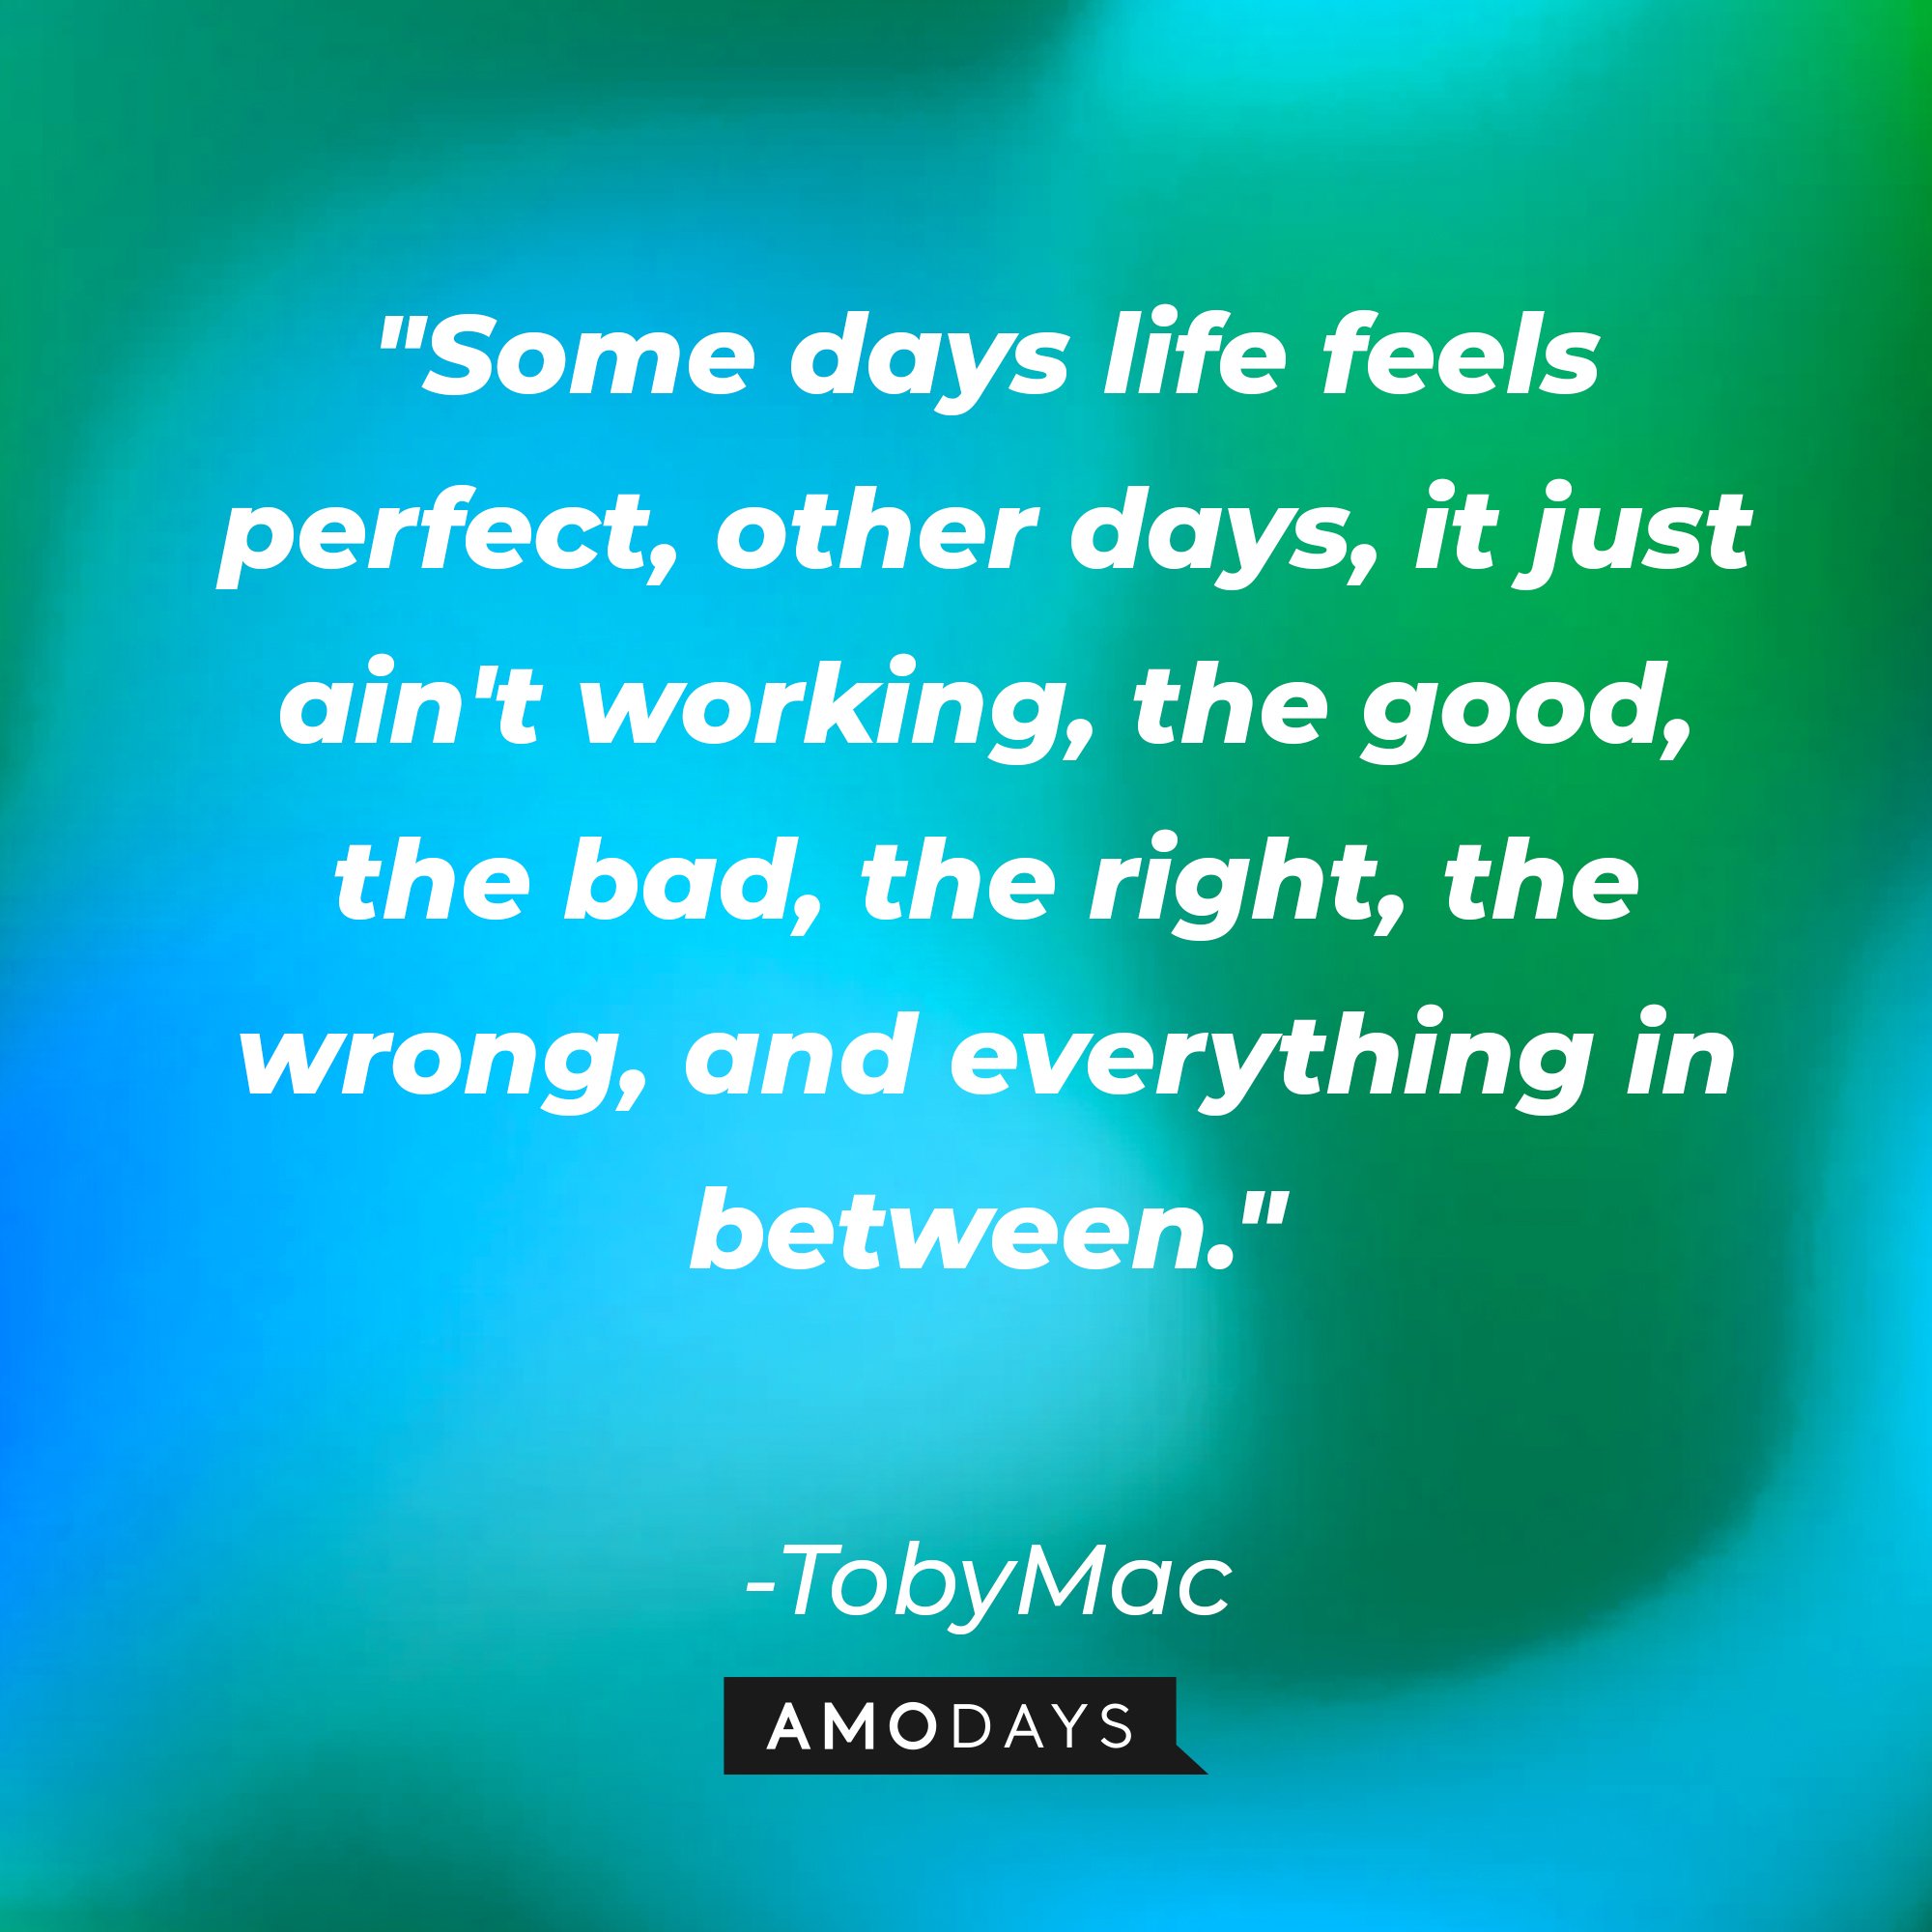 TobyMac's quote: "Some days life feels perfect, other days, it just ain't working, the good, the bad, the right, the wrong, and everything in between." | Image: AmoDays